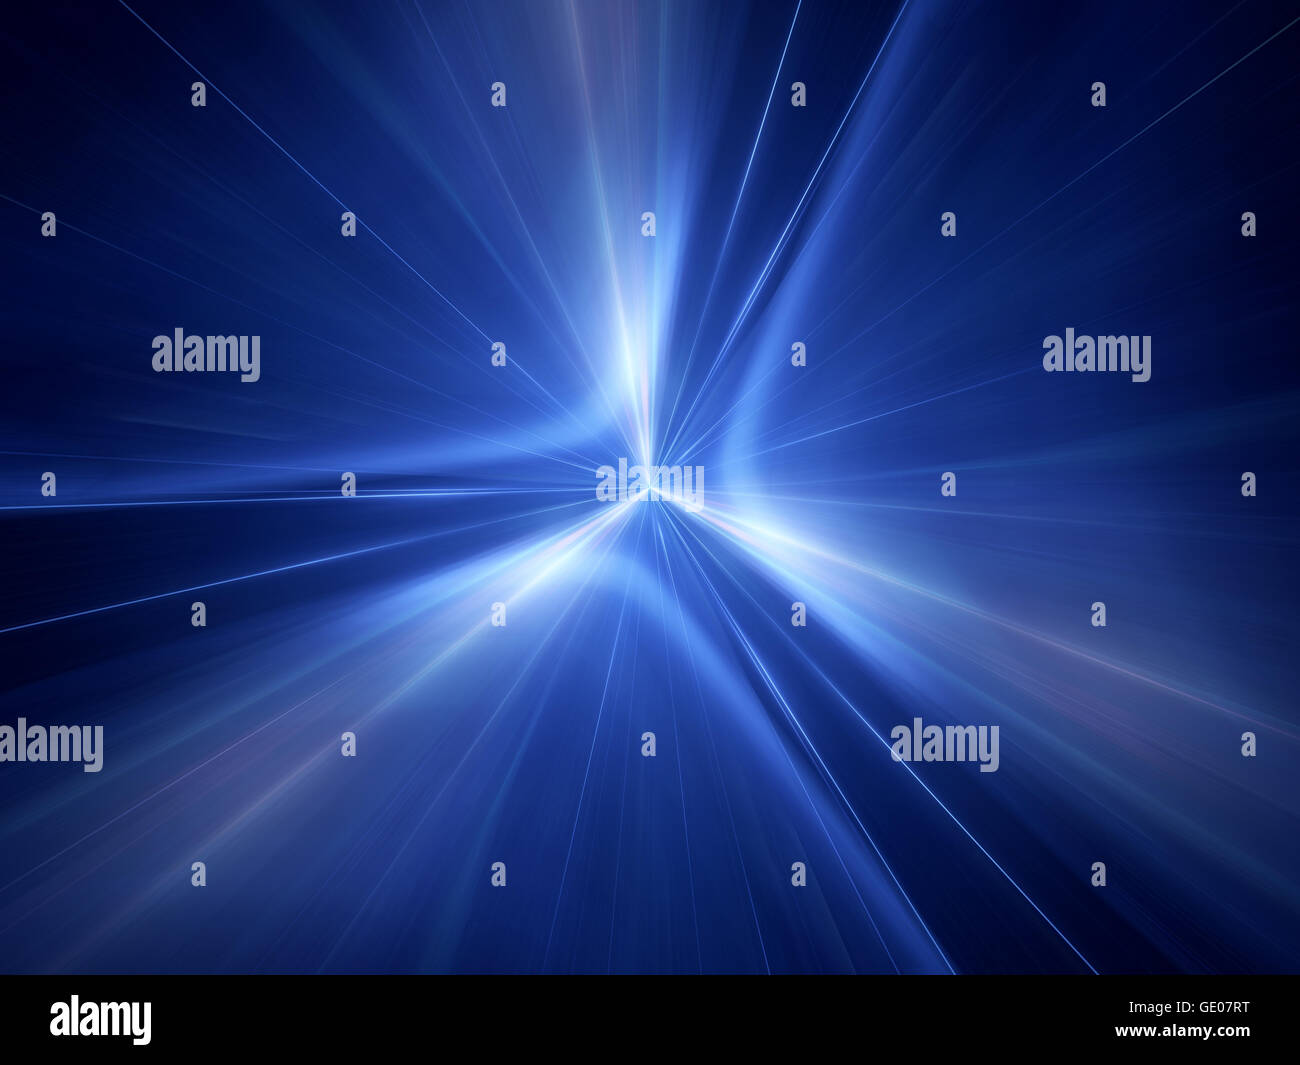 Blue glowing interstellar jump in space, computer generated abstract background Stock Photo